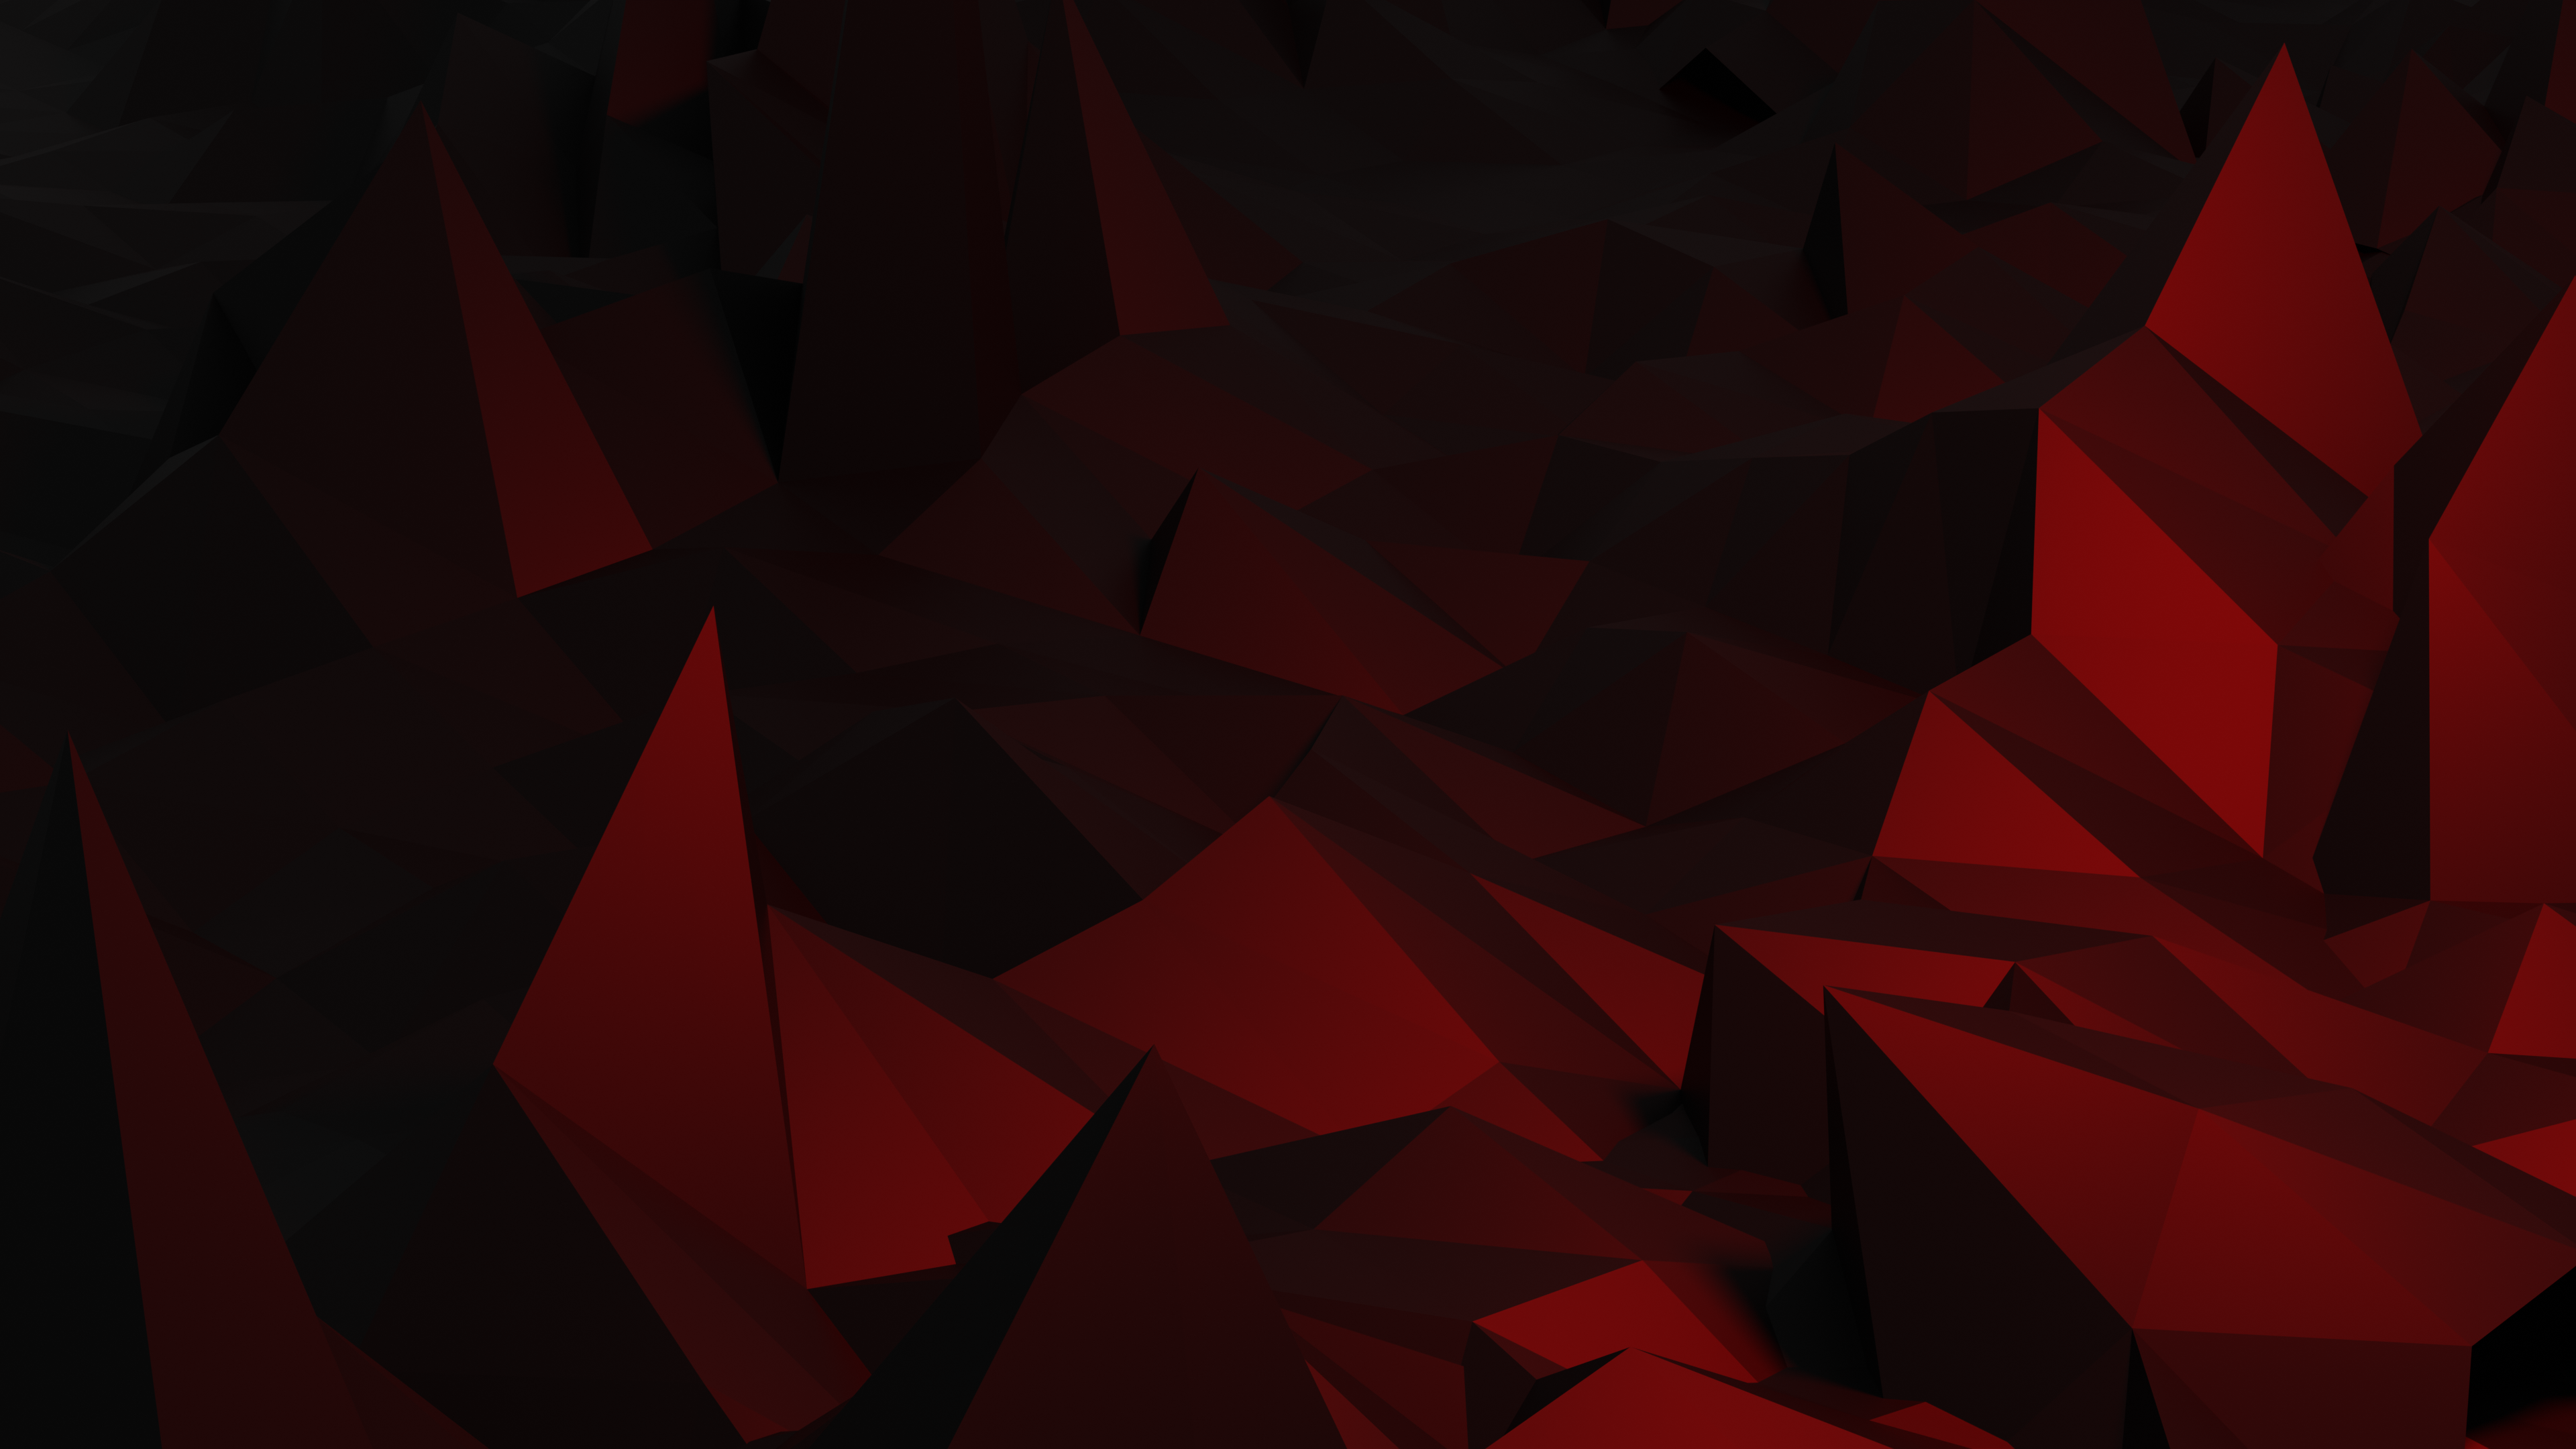 Low Poly Poly Polygon Art 3D Abstract Blender 3840x2160